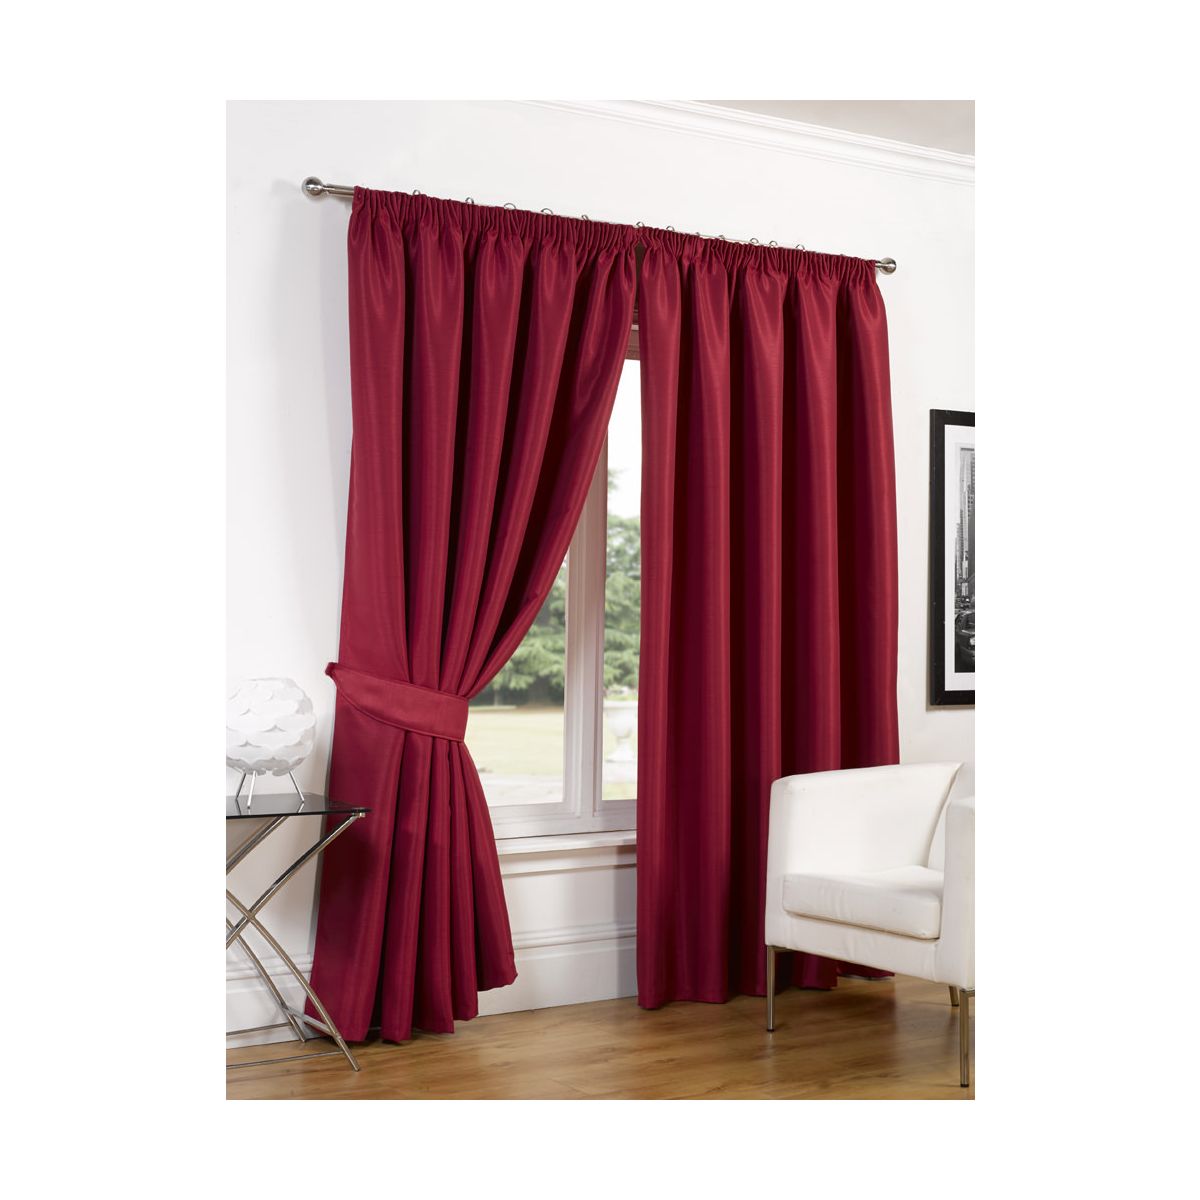 Luxury Faux Silk Blackout Curtains Including Tiebacks - Red 46"X72"